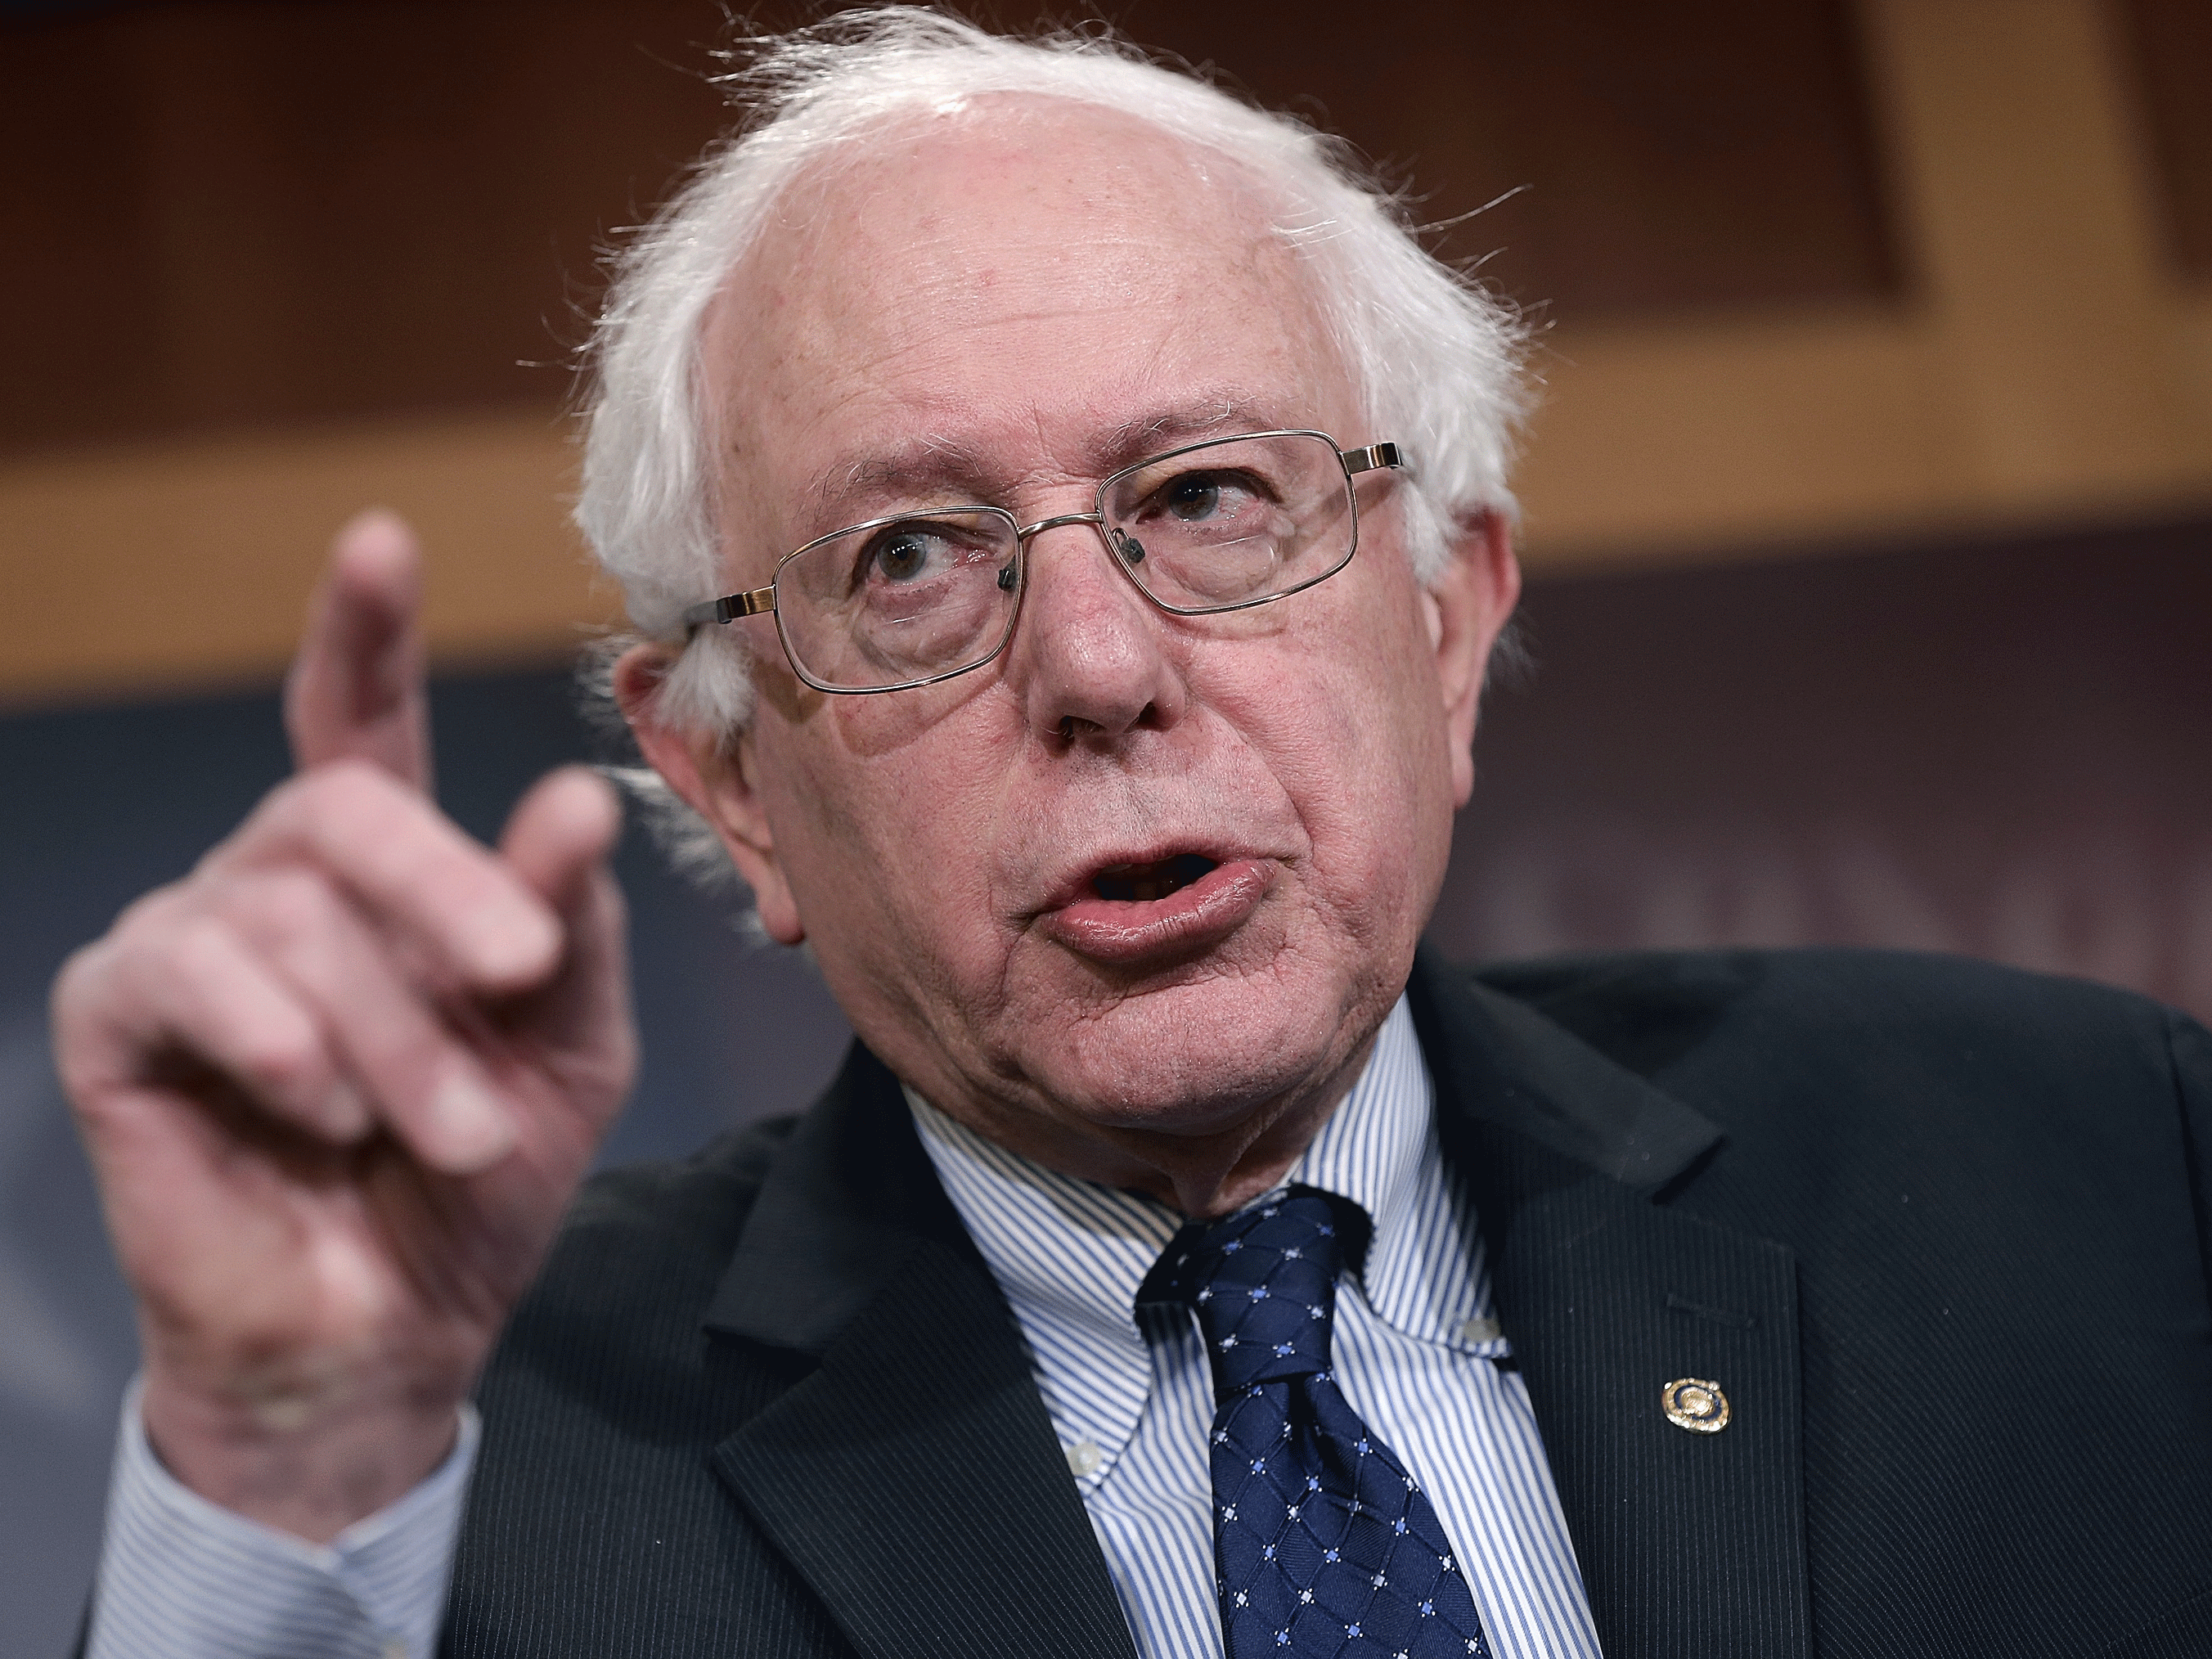 Bernie Sanders Democratic Presidential Candidate Was Less Than Impressed When Questioned About 